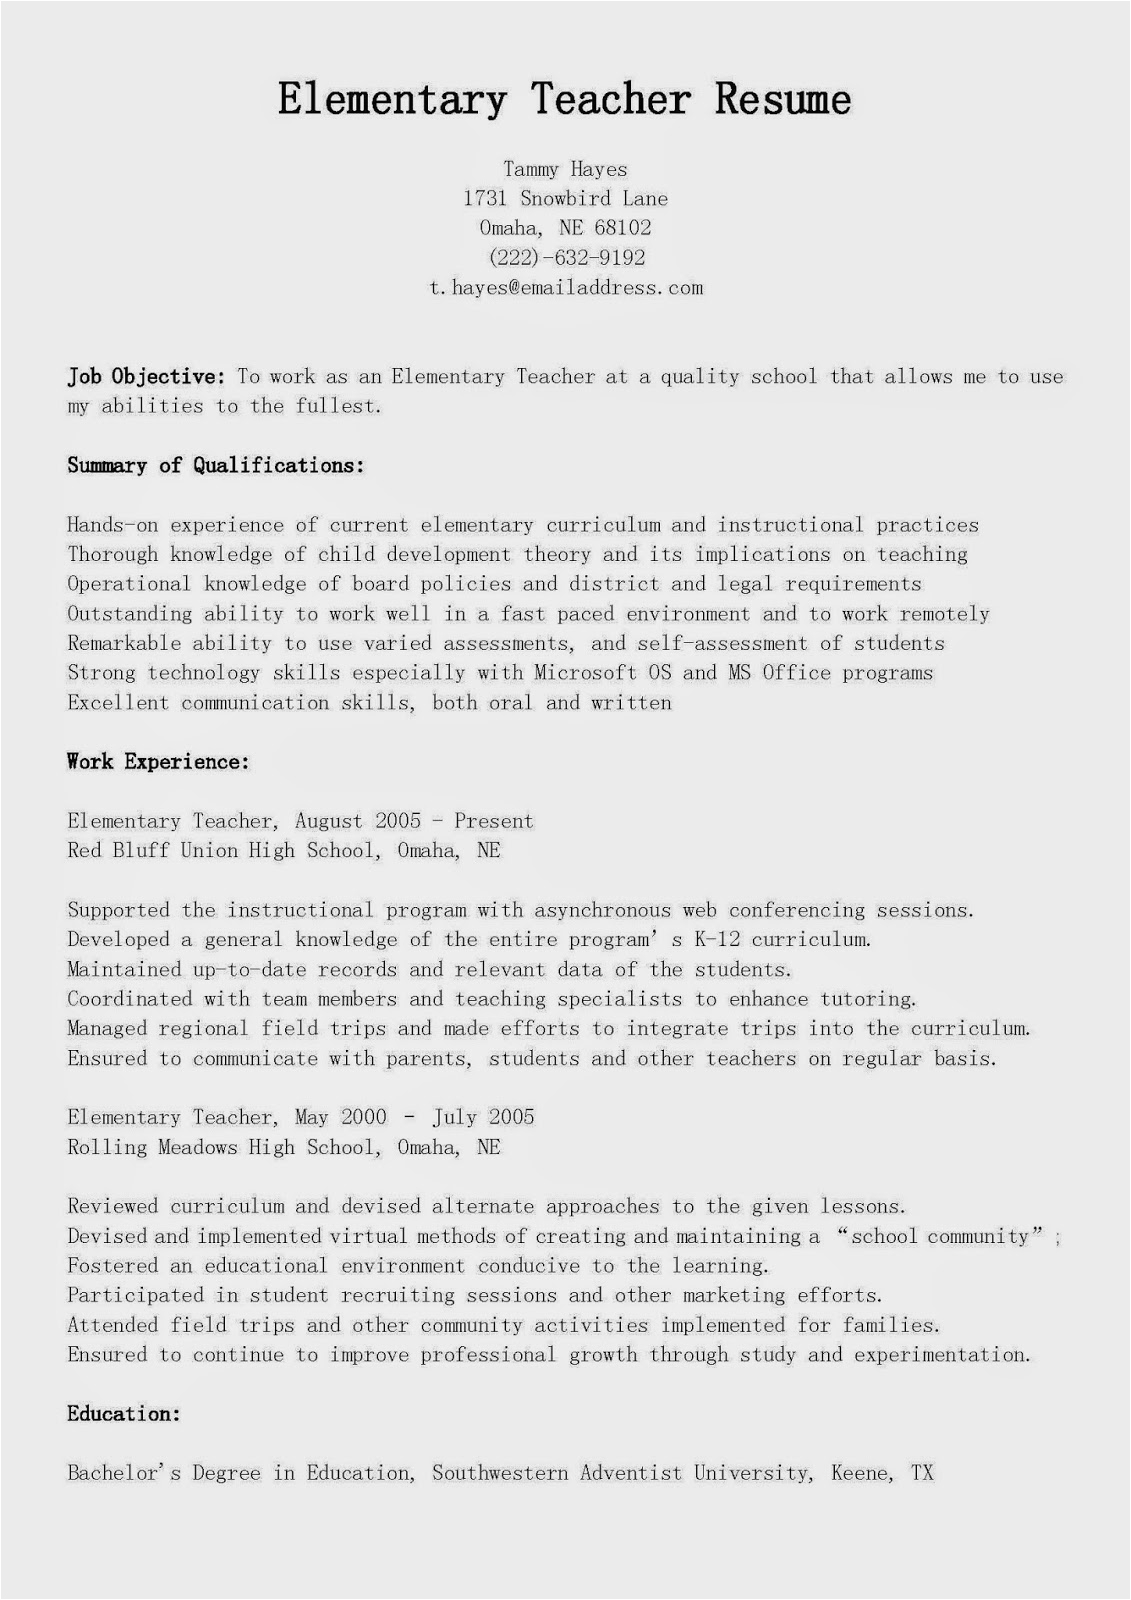 Professional Summary Resume Sample for Teachers Resume Samples Elementary Teacher Resume Sample